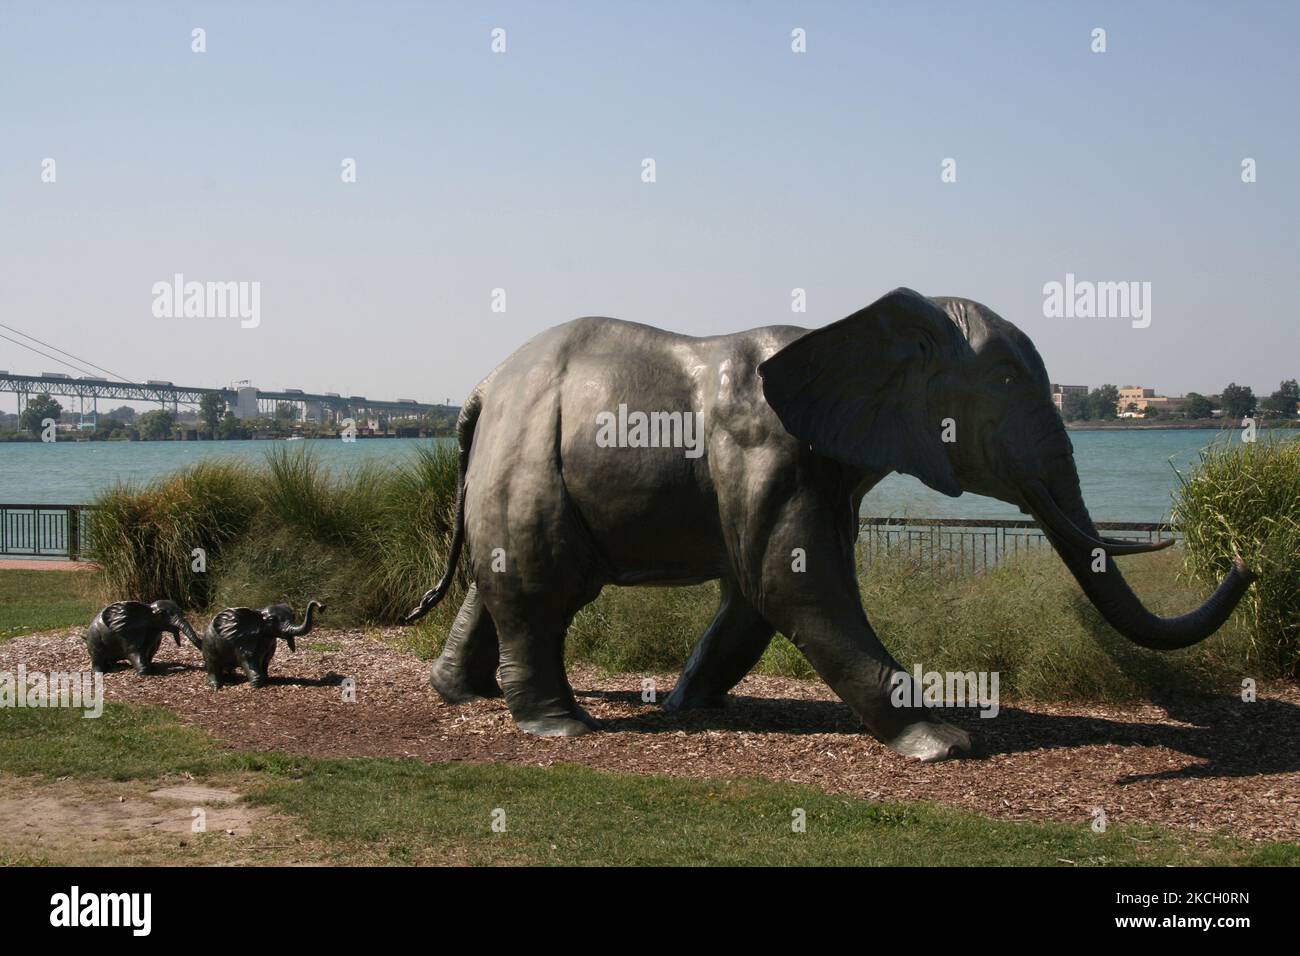 Sculpture of elephants at the Windsor Sculpture Park by the Detroit River in Windsor, Ontario, Canada. (Photo by Creative Touch Imaging Ltd./NurPhoto) Stock Photo